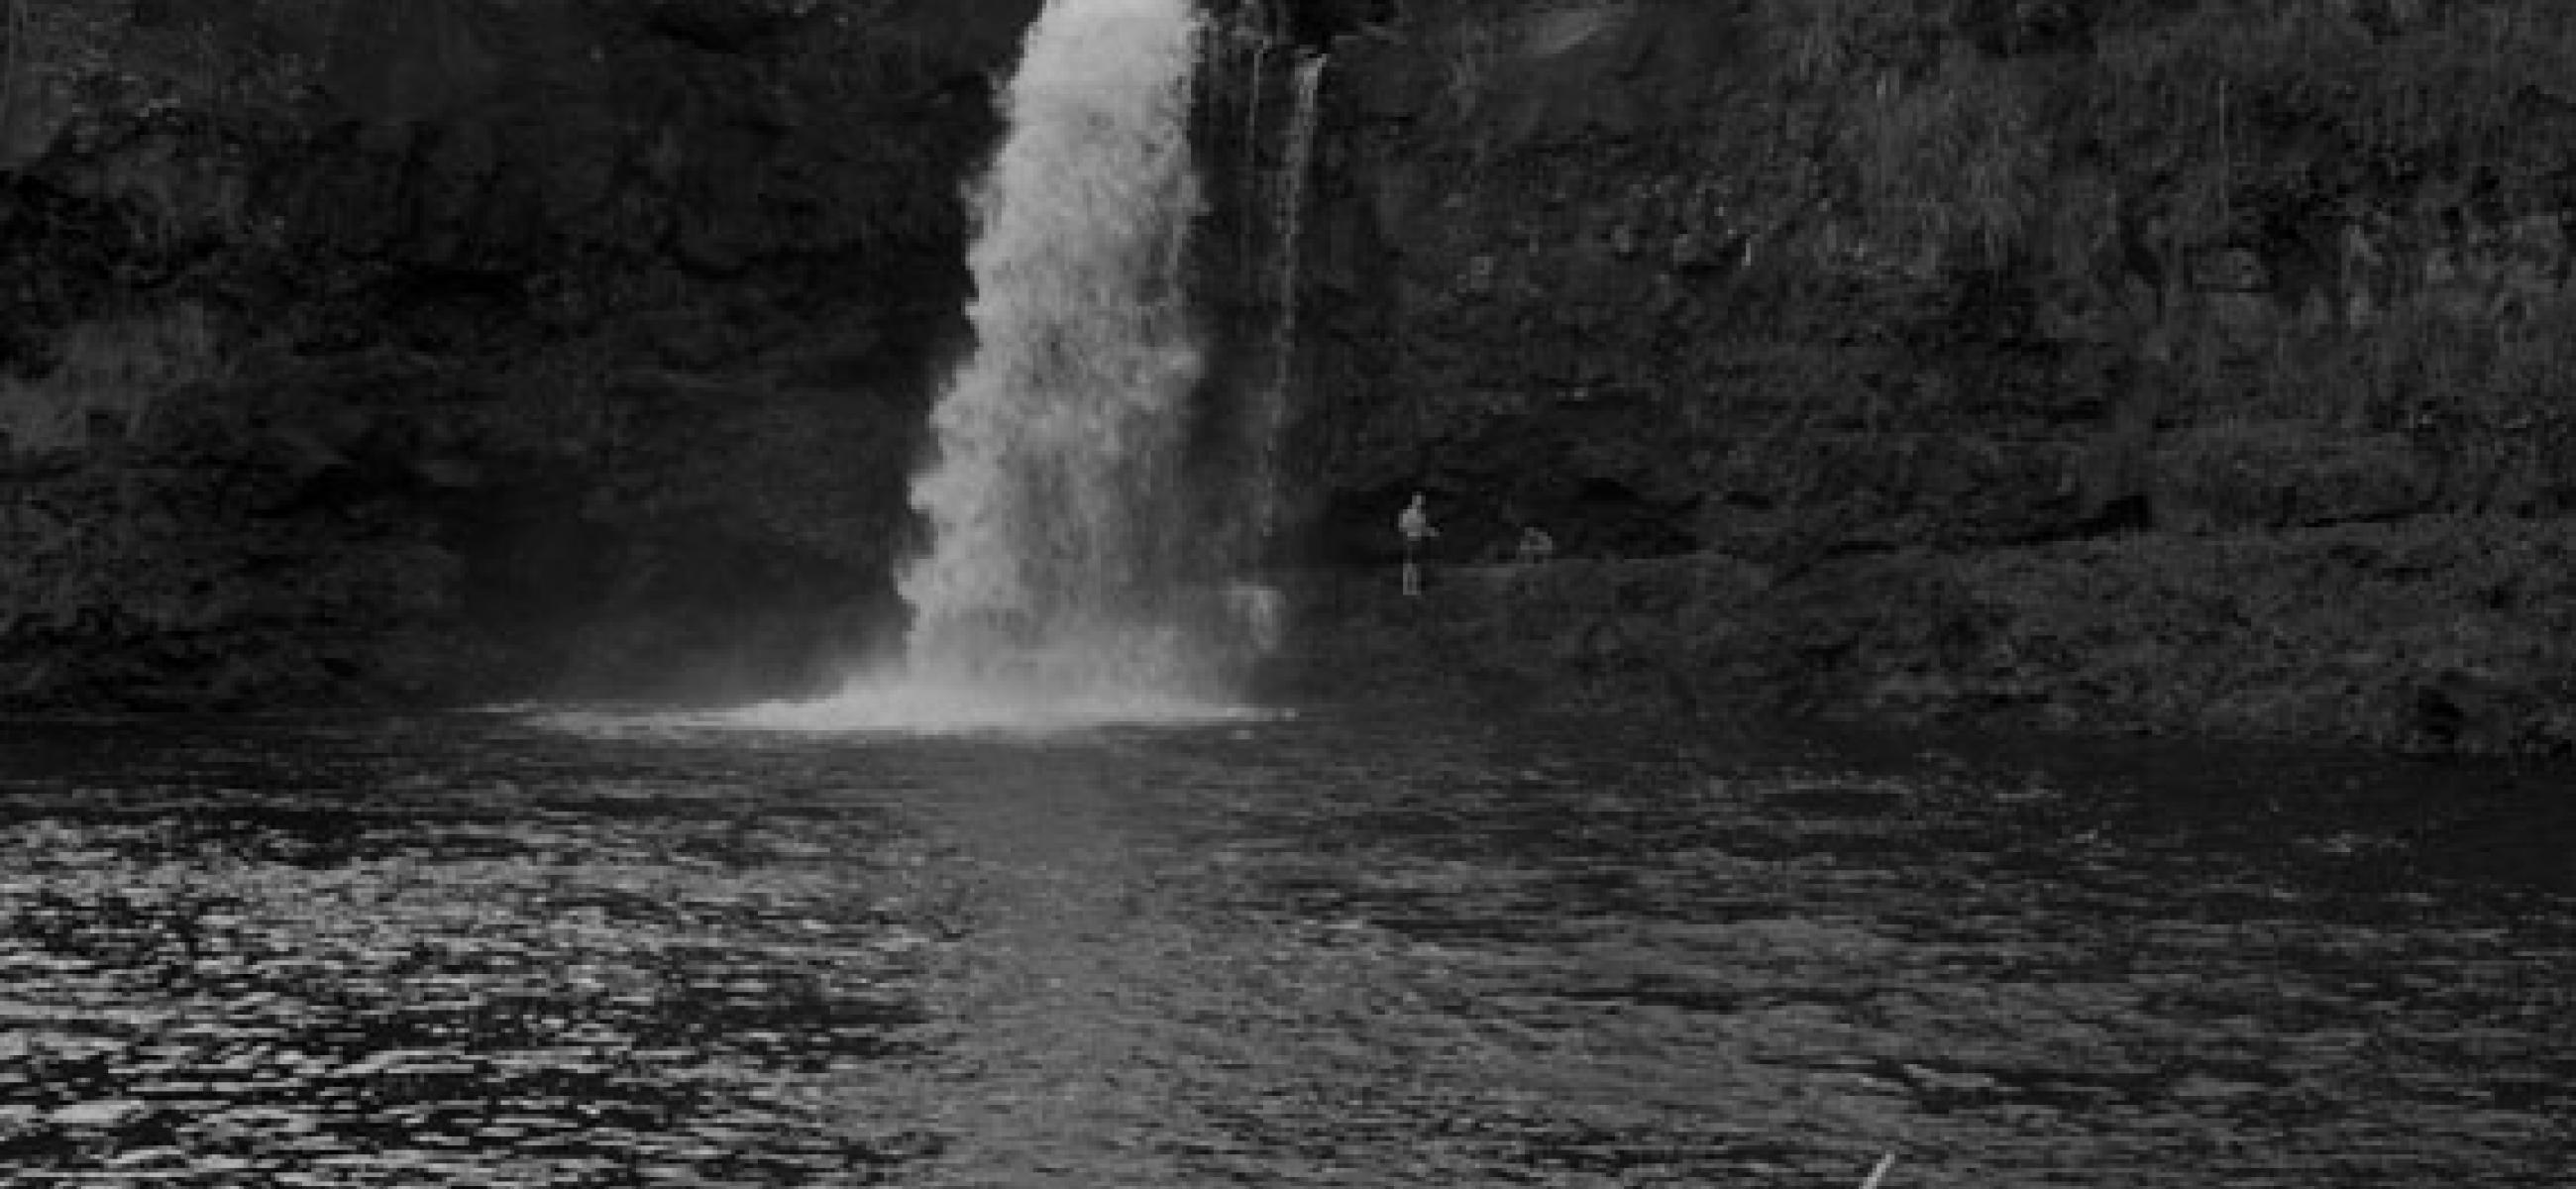 black and white photo of waterfall with pool and two people on shore in foreground